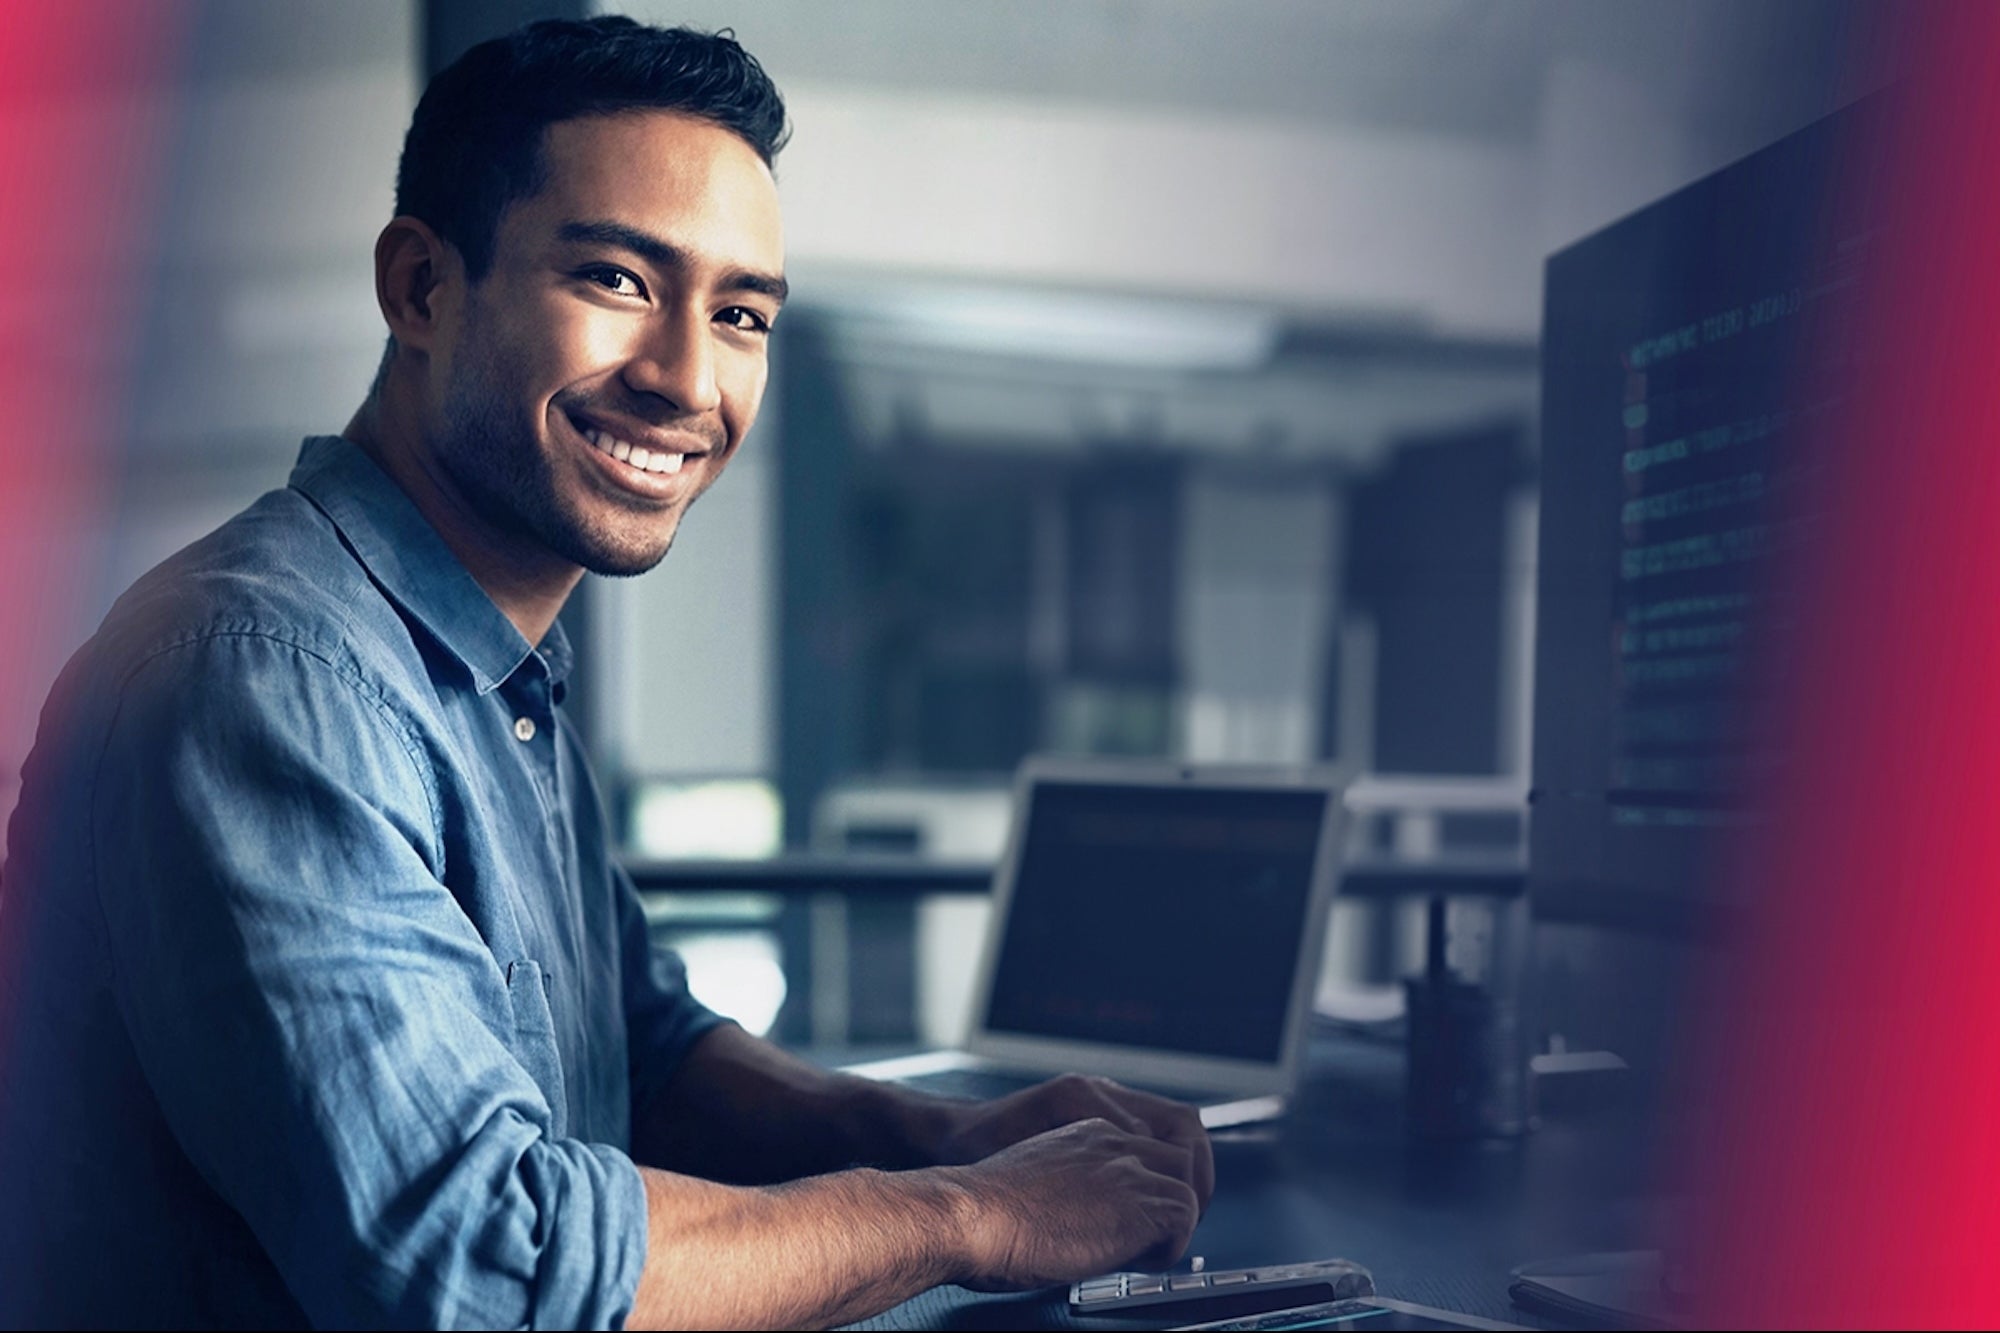 Add Extra 20% Savings to This Complete CompTIA Course Bundle Through April 16 [Video]